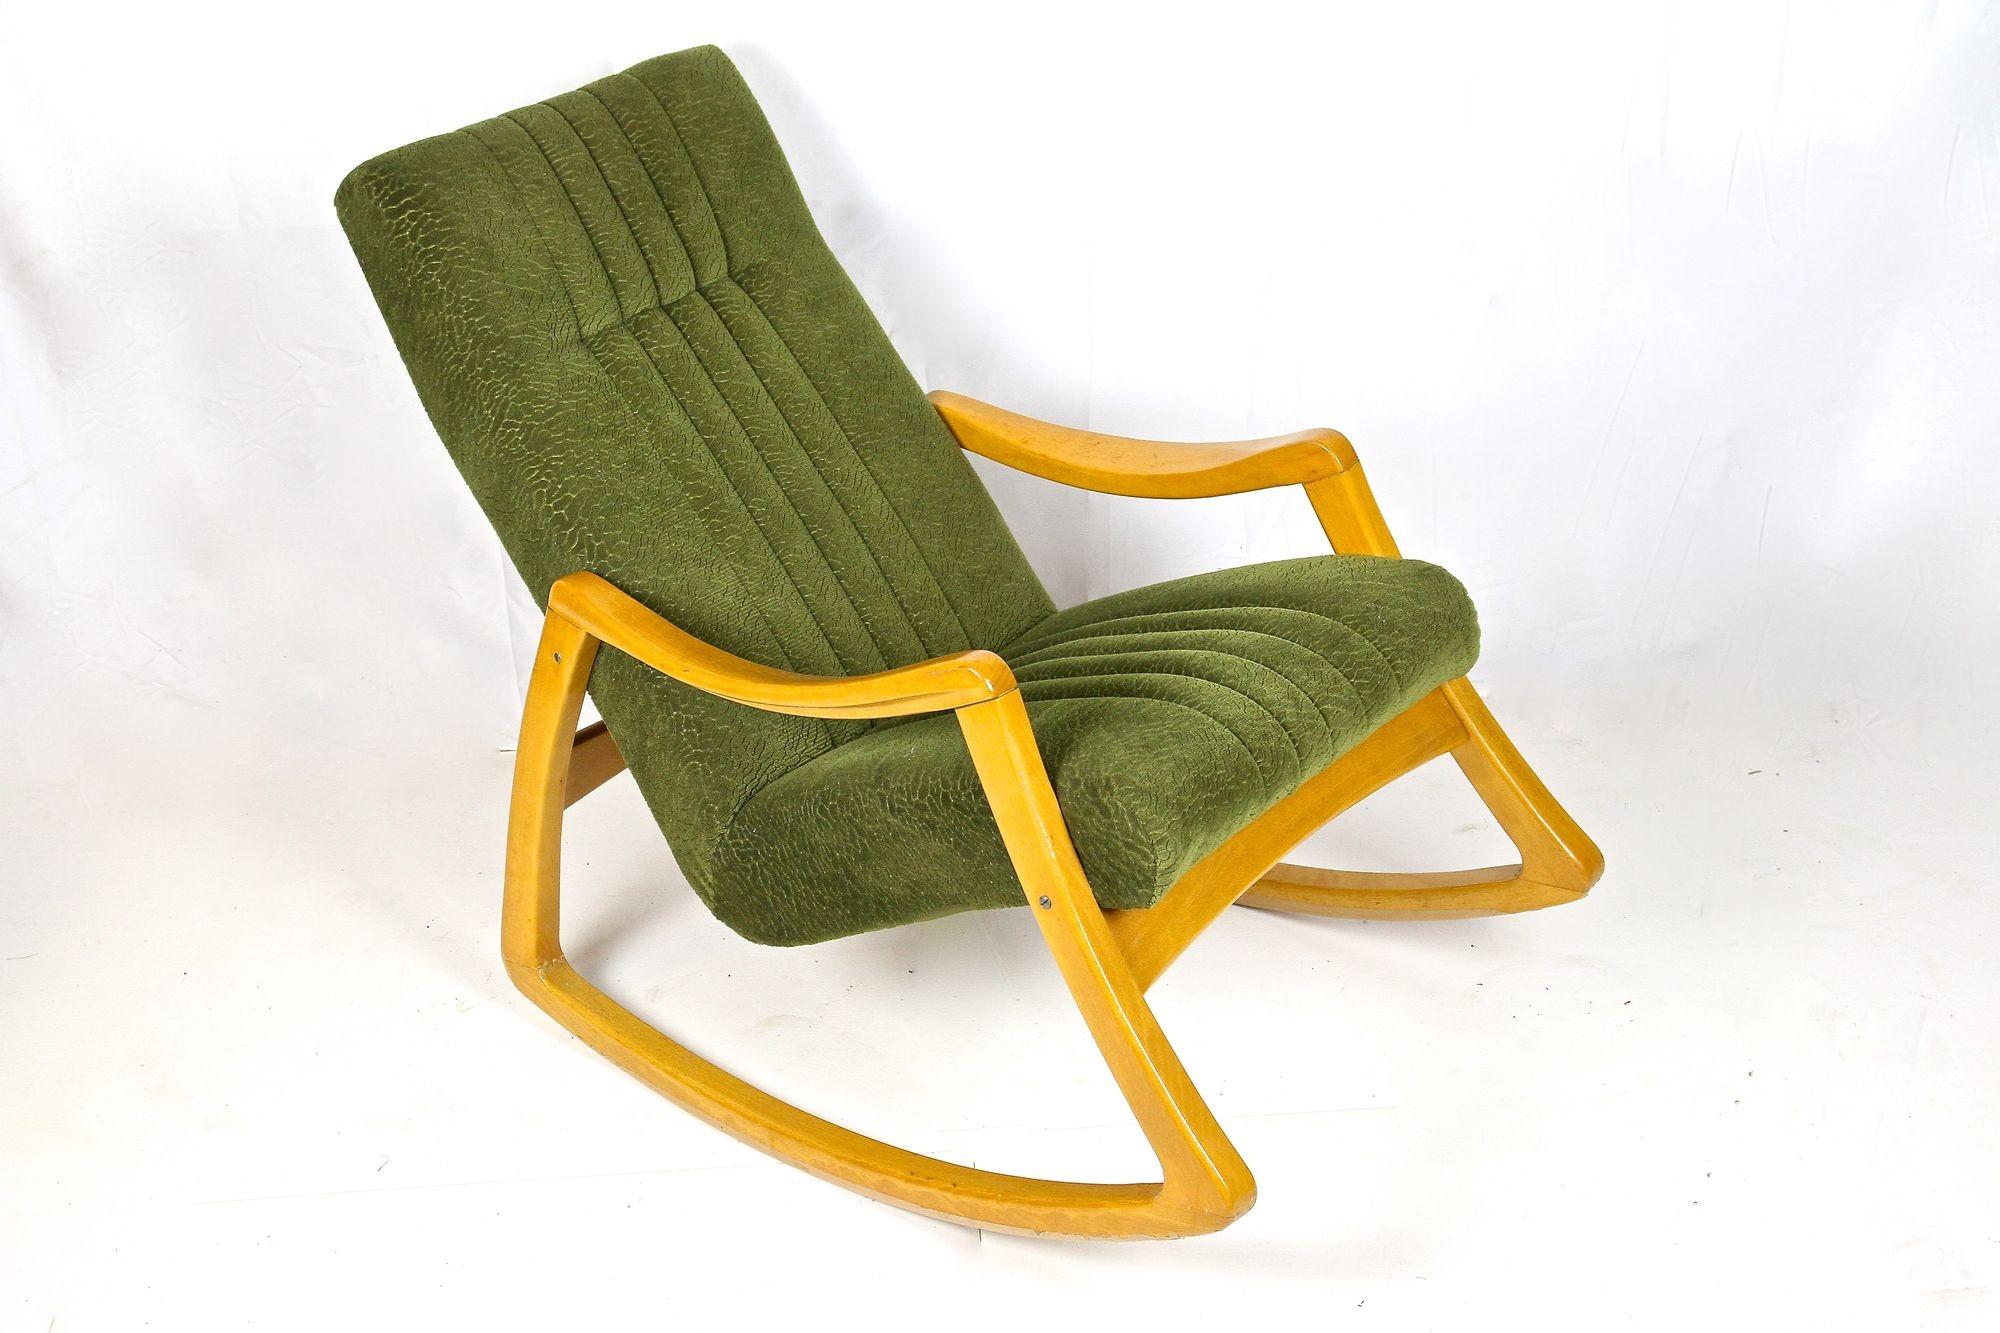 Stylish designed Mid-Century Modern rocking chair made by the czech company of TON around 1953. This unusual rocking chair impresses with a very uncommon design made of Fine laquered beech. The great looking, still original moss green fabric builds